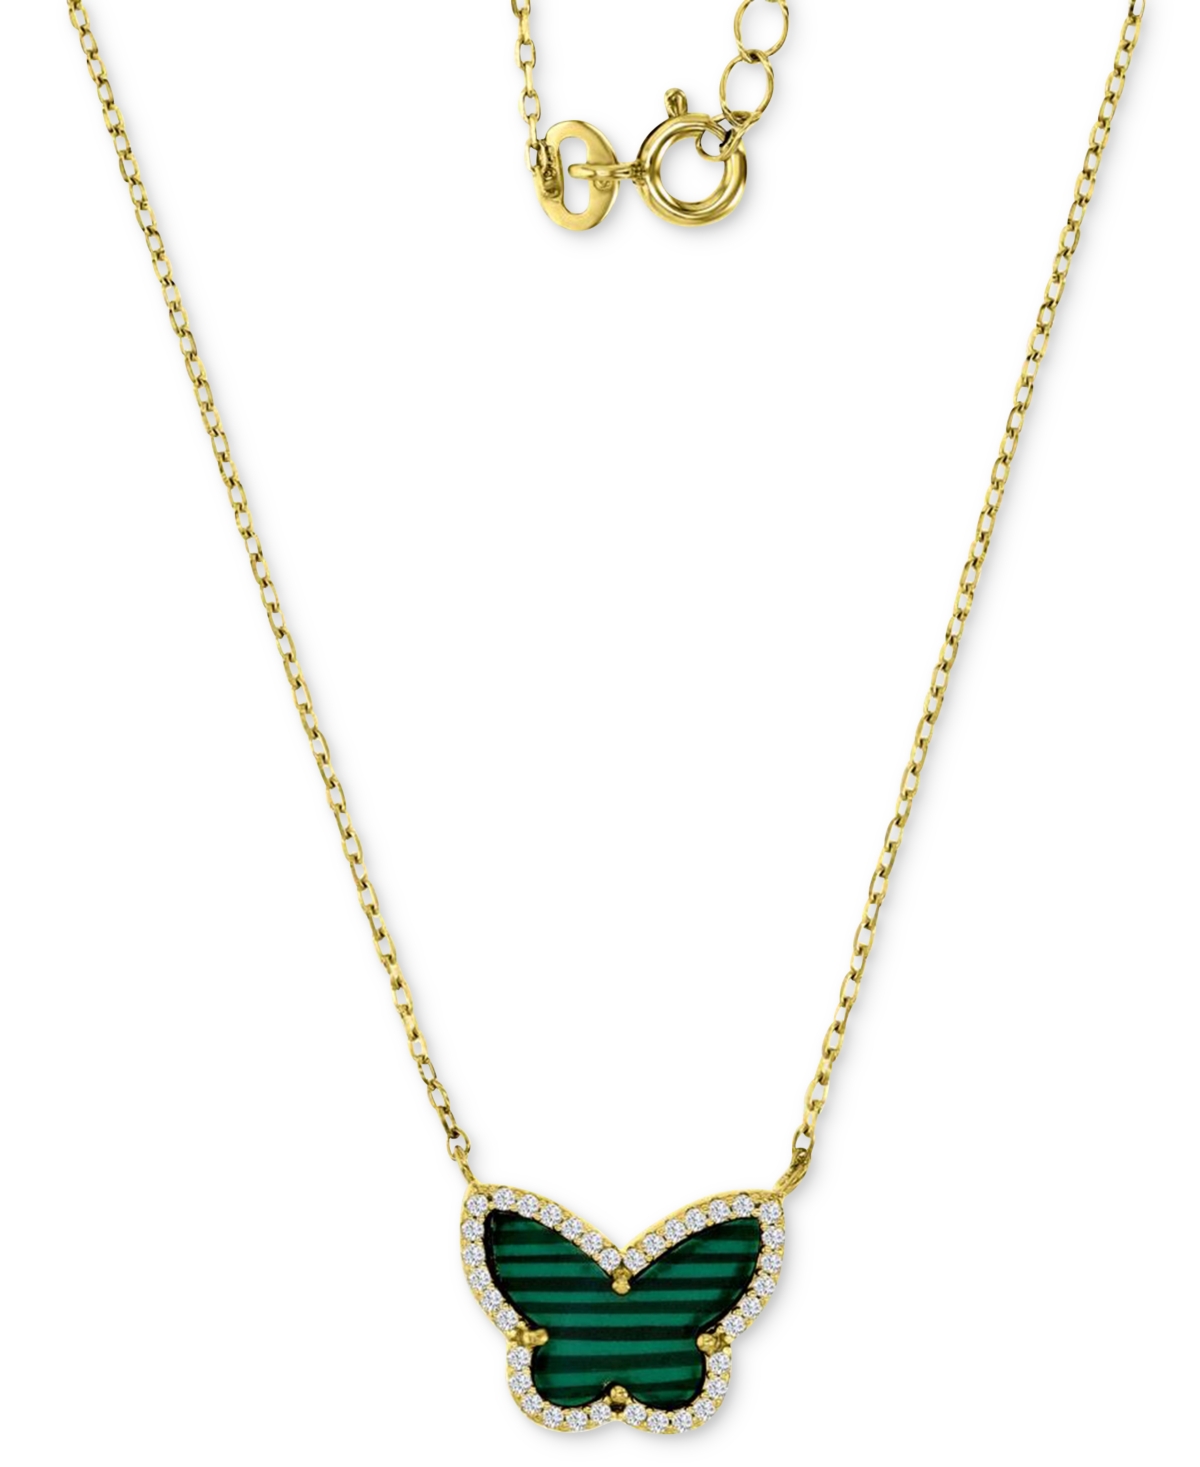 Simulated Malachite & Cubic Zirconia Butterfly Pendant Necklace in 14k Gold-Plated Sterling Silver, 18" + 2" extender - Malachite